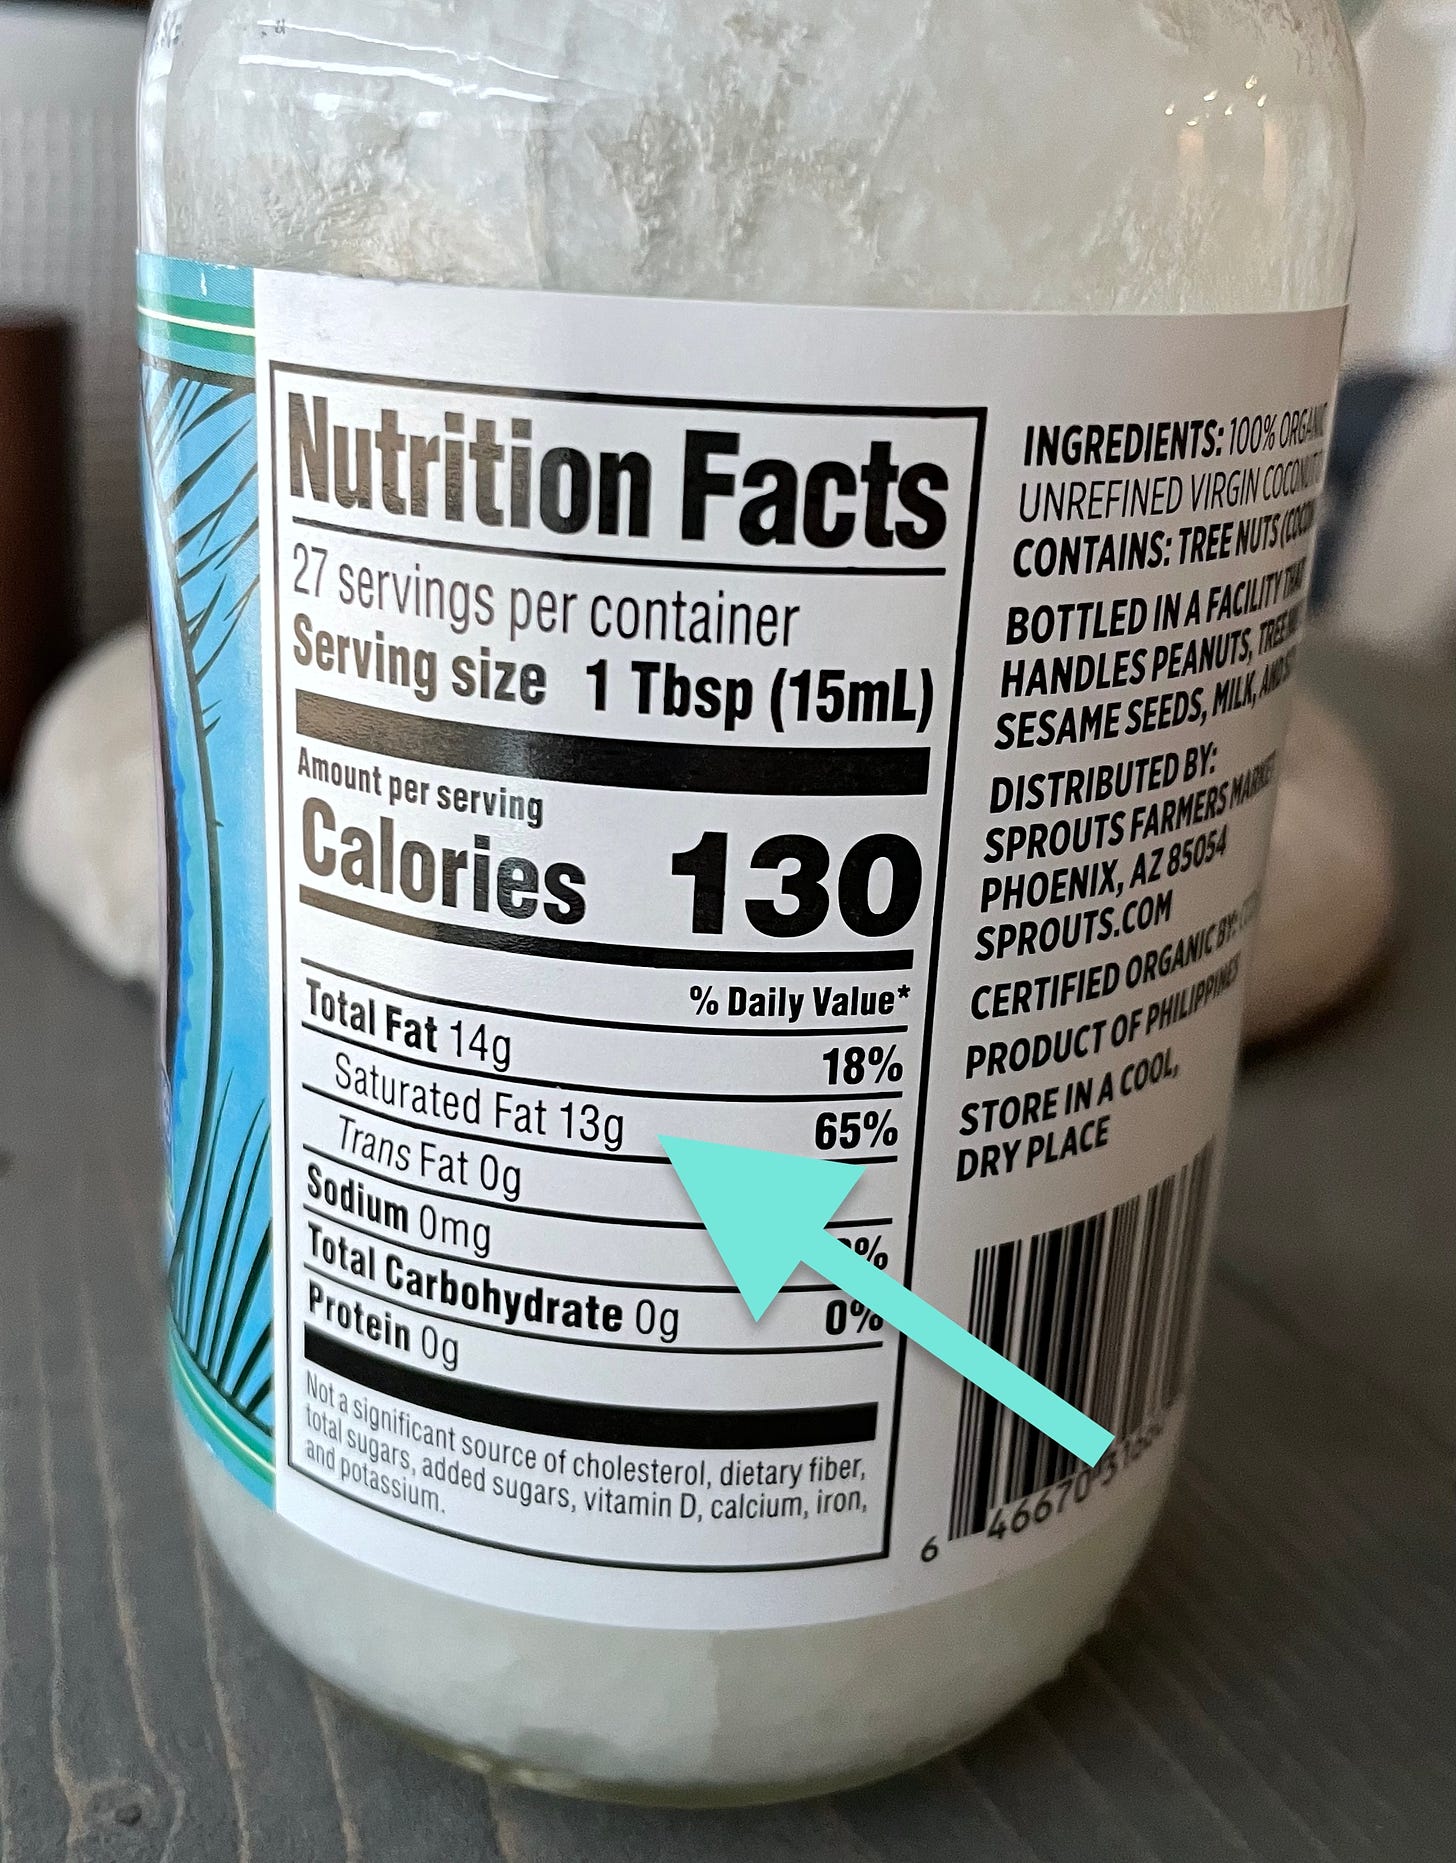 Coconut oil nutrition label highlighting 13 grams of saturated fat